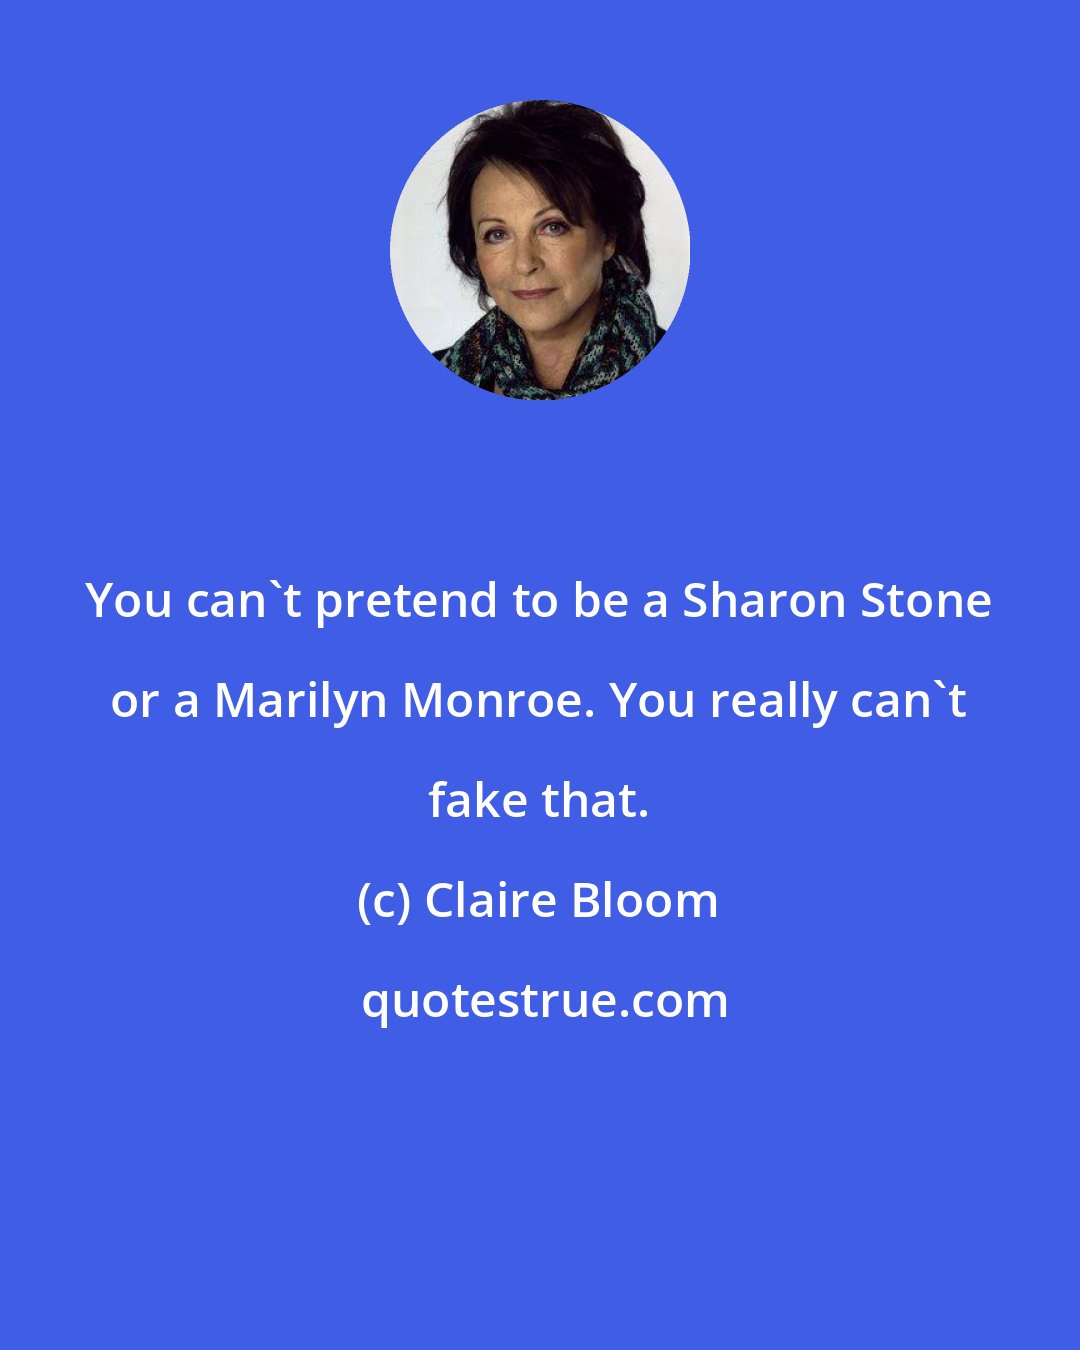 Claire Bloom: You can't pretend to be a Sharon Stone or a Marilyn Monroe. You really can't fake that.